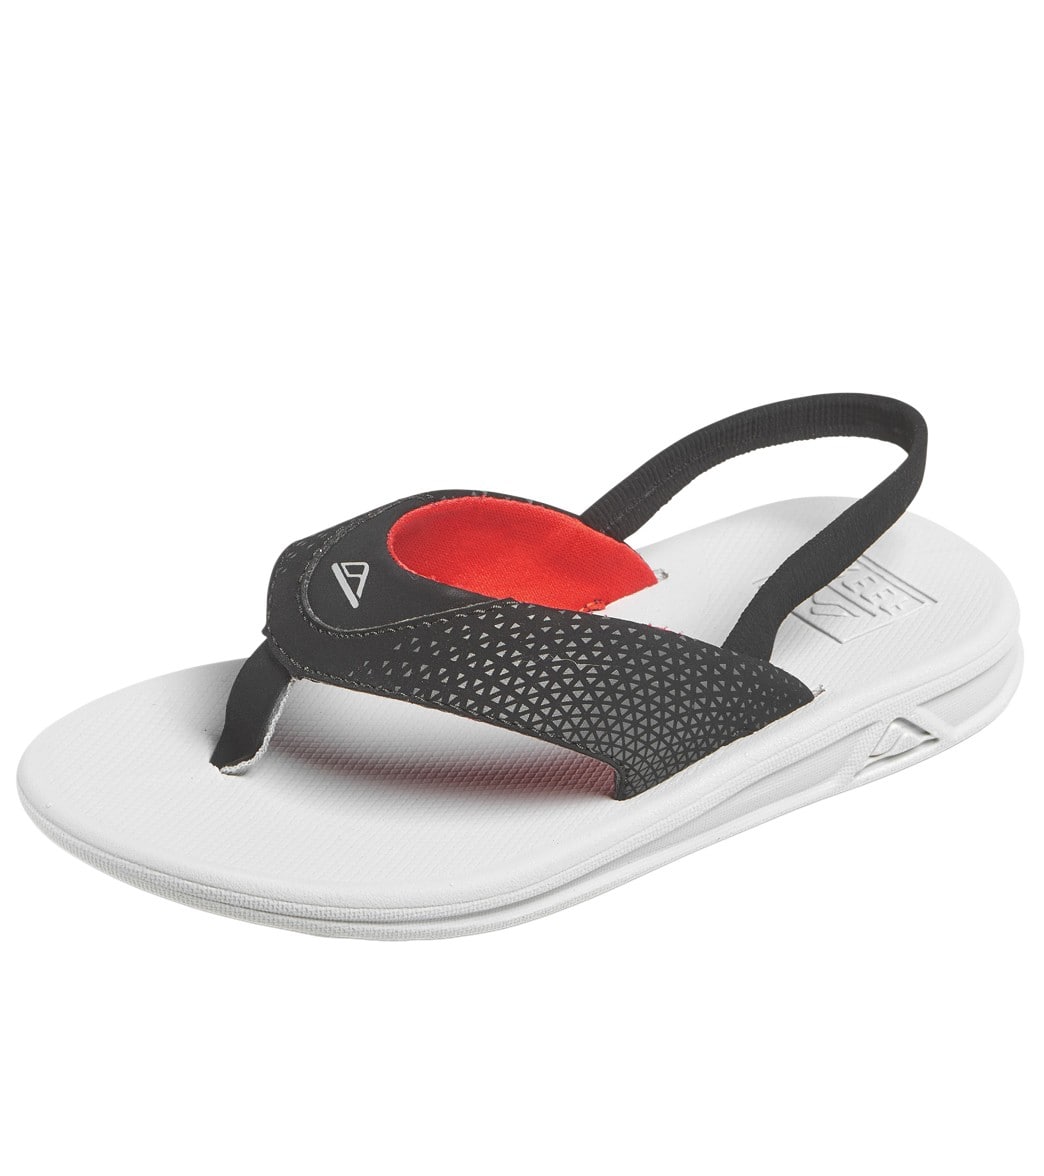 Reef Little Boys' Grom Rover Sandals - Grey/Red 4/5 - Swimoutlet.com